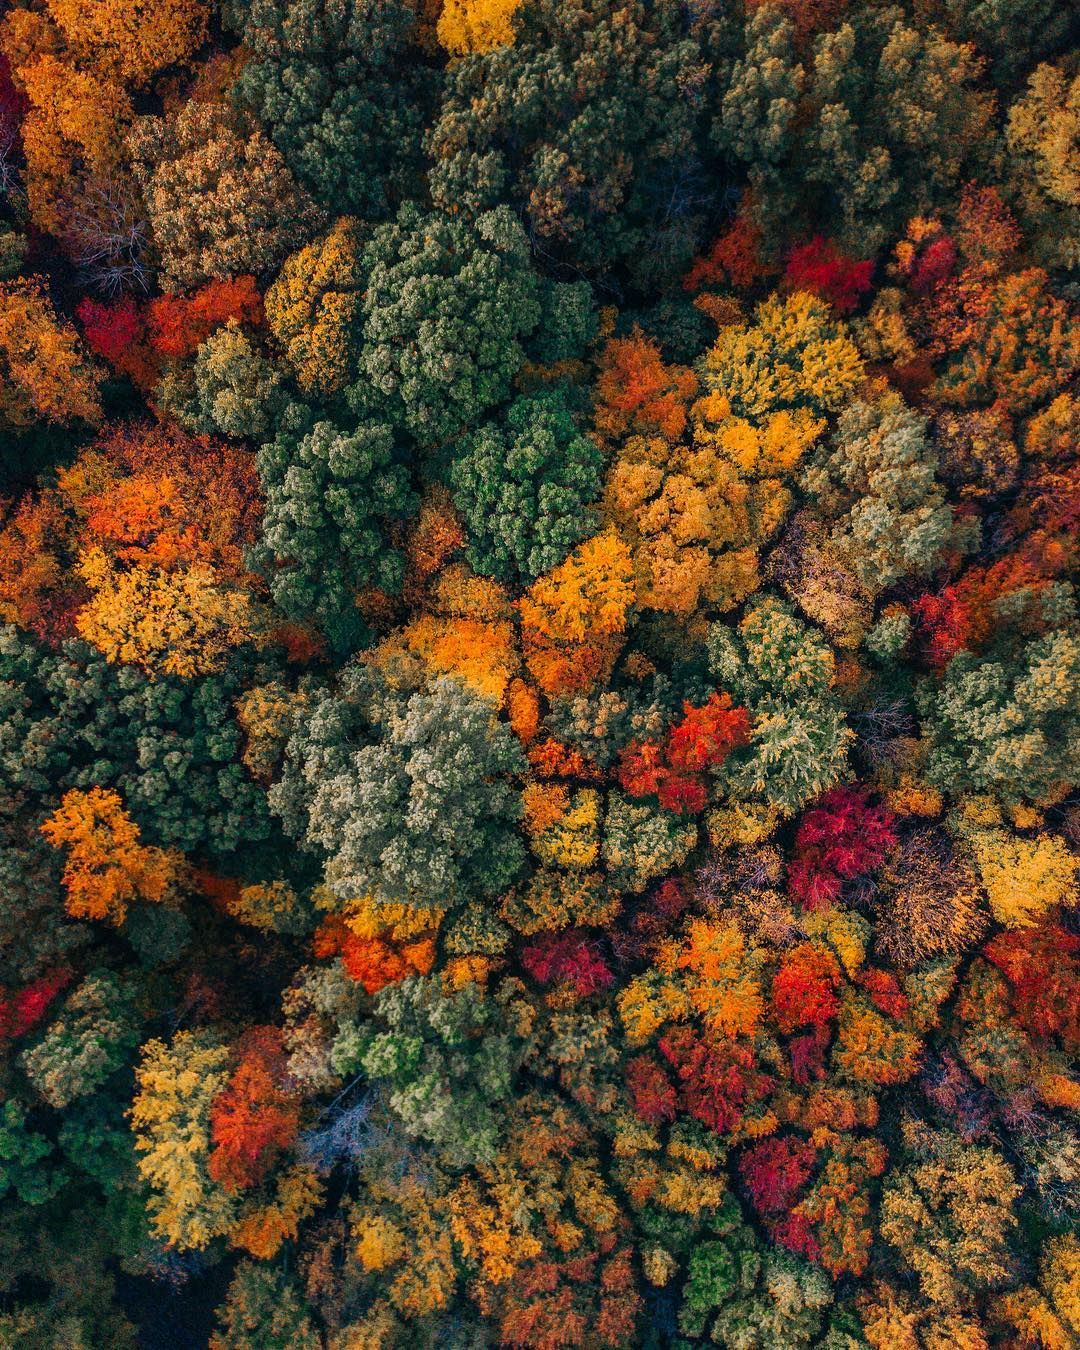 Nature Fall Leaves Trees Drone Photo Birds Eye View Colorful Forest Portrait Display 1080x1350